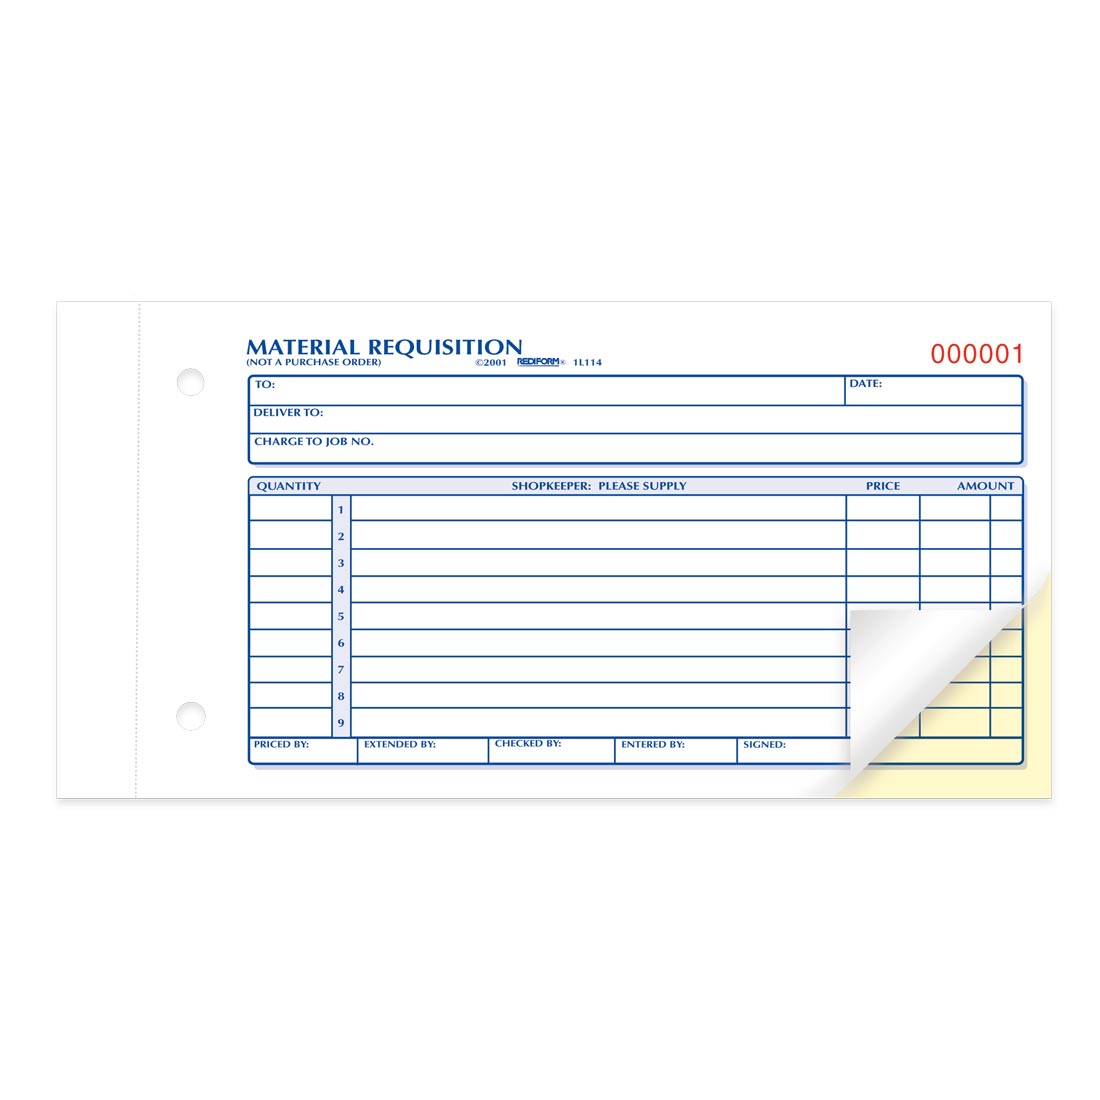 Material Requisition Book 1L114